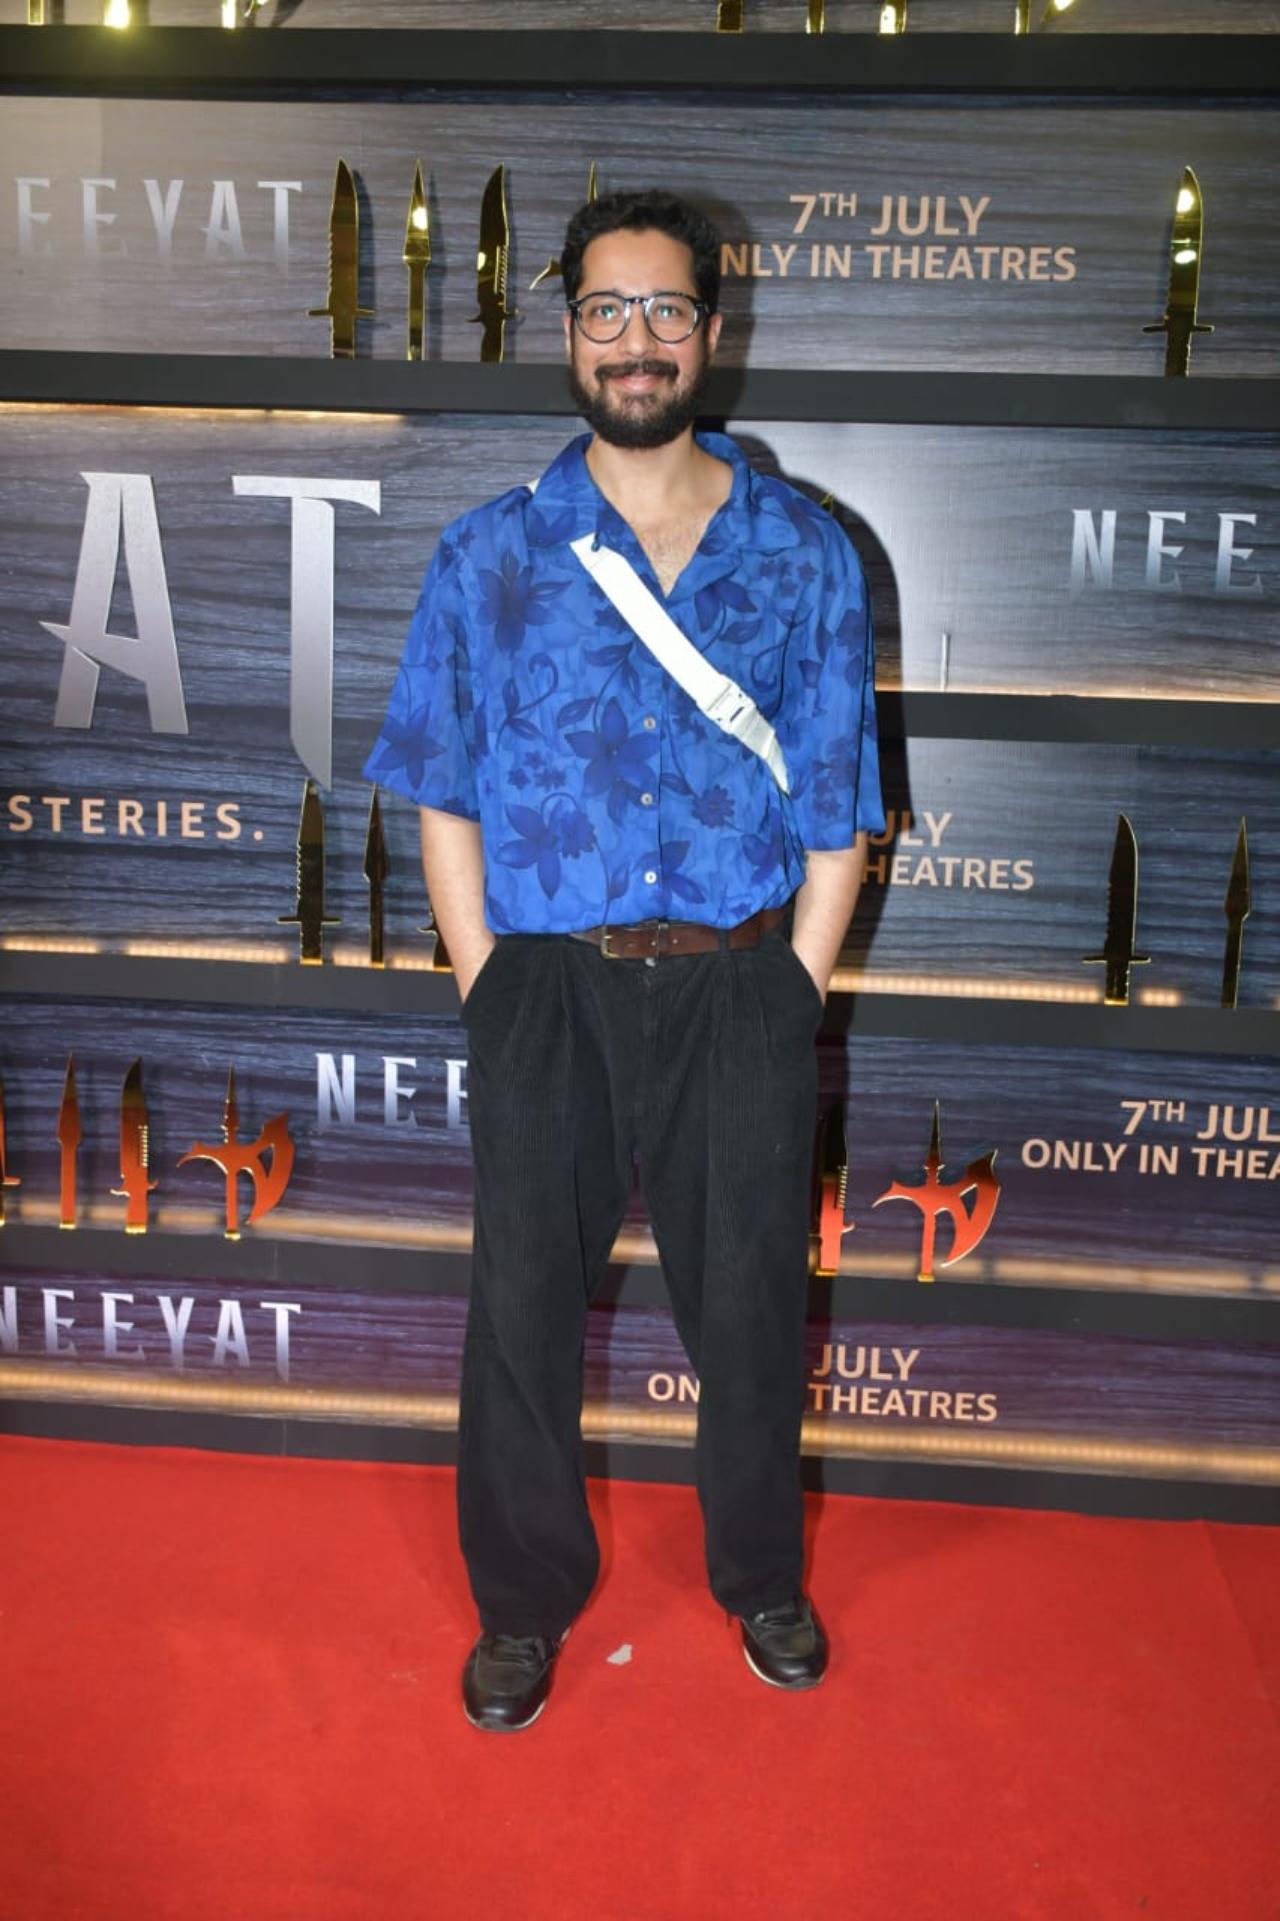 Rajat Barcmecha was cheerful in a blue shirt and black pants at the screening. He was seen in a joyful mood as he interacted with the paparazzi